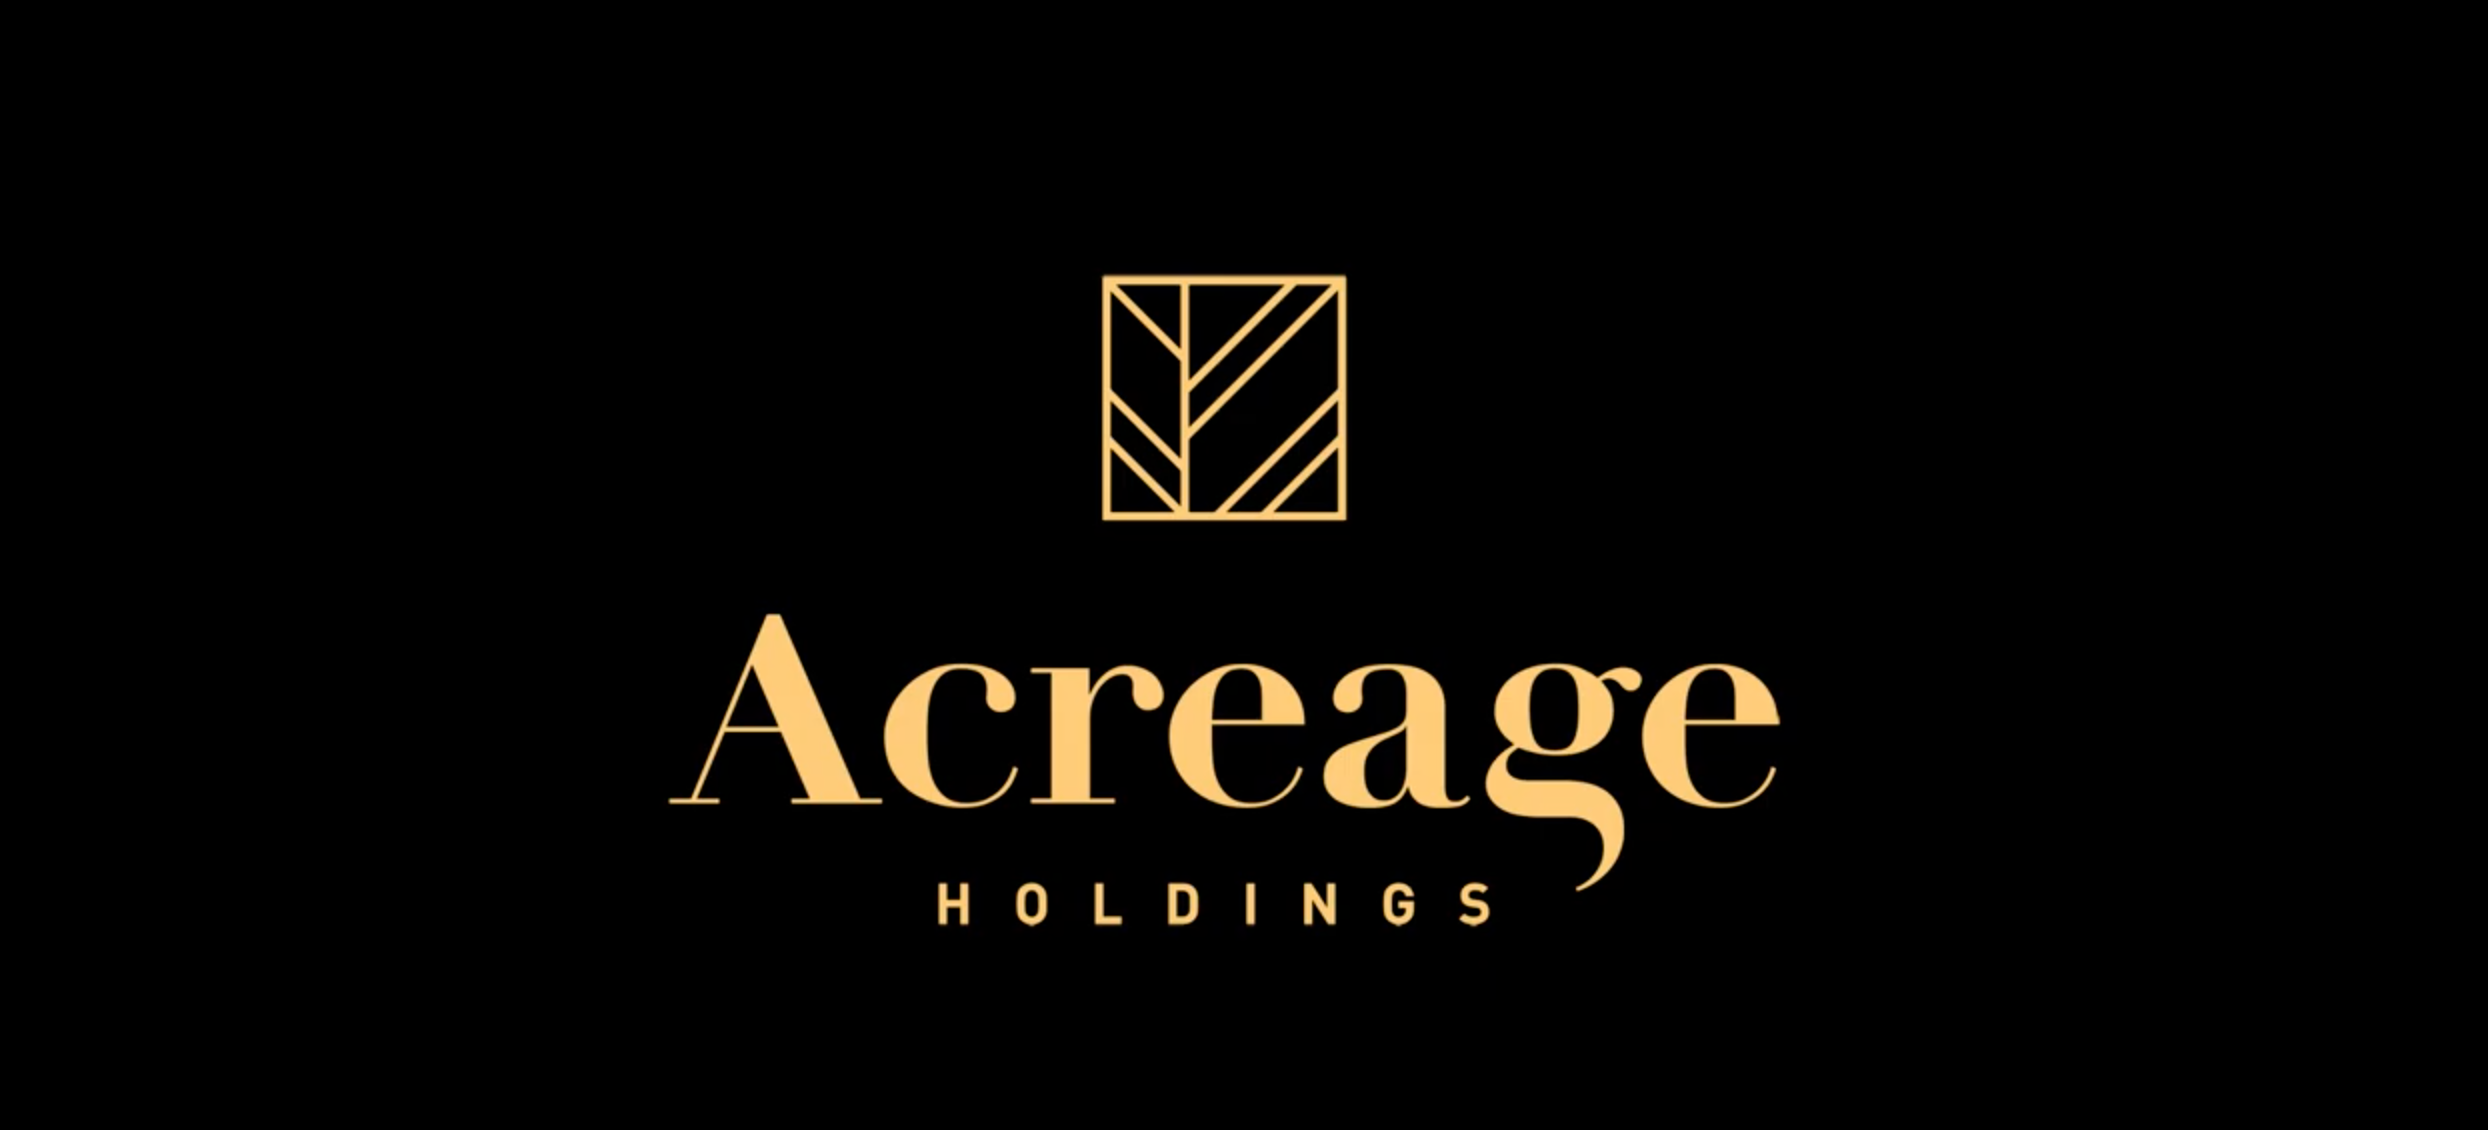 Acreage Holdings Furloughs Employees, Closes Facilities, Axes M&A Deal Due To COVID-19 Crisis